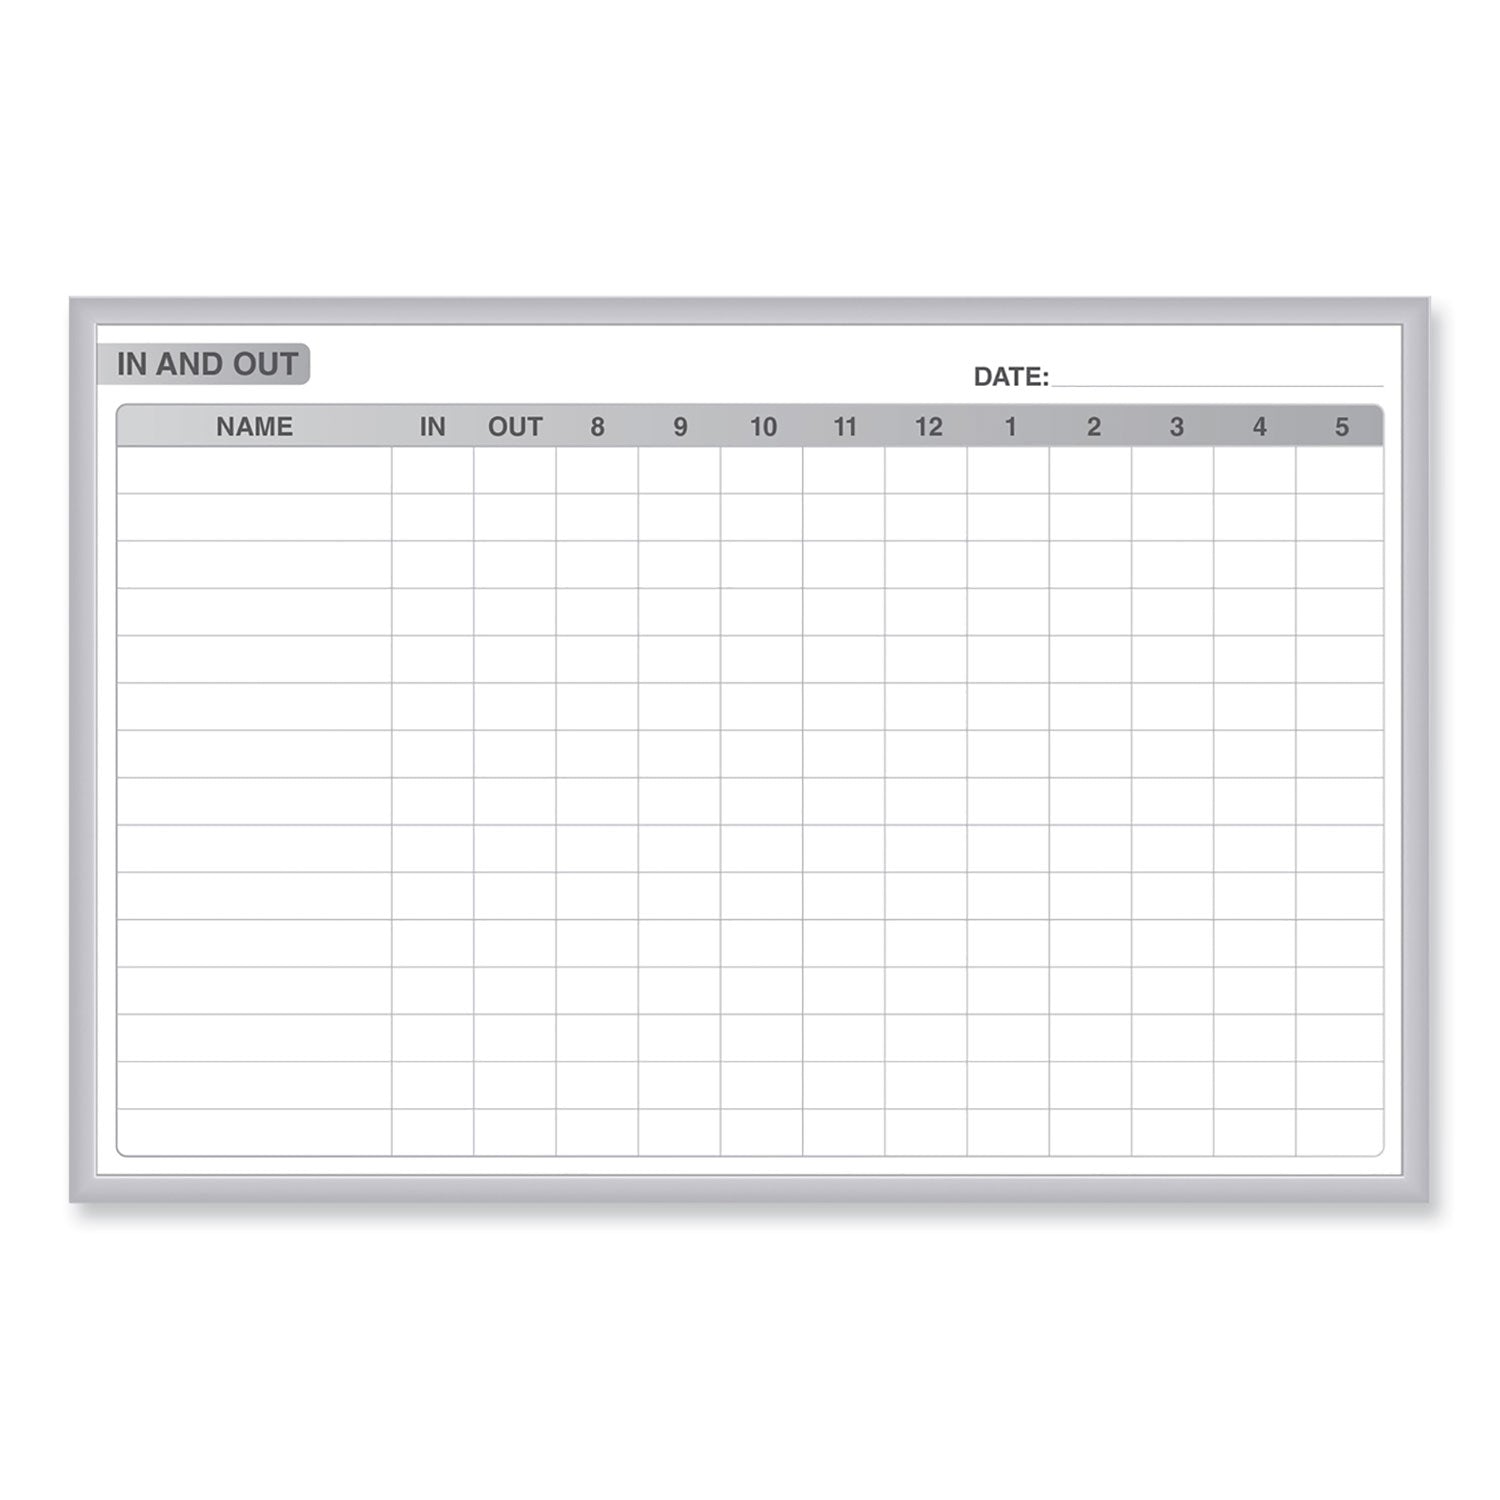 in-out-magnetic-whiteboard-485-x-365-white-gray-surface-satin-aluminum-frame-ships-in-7-10-business-days_ghegrpm301e34 - 1